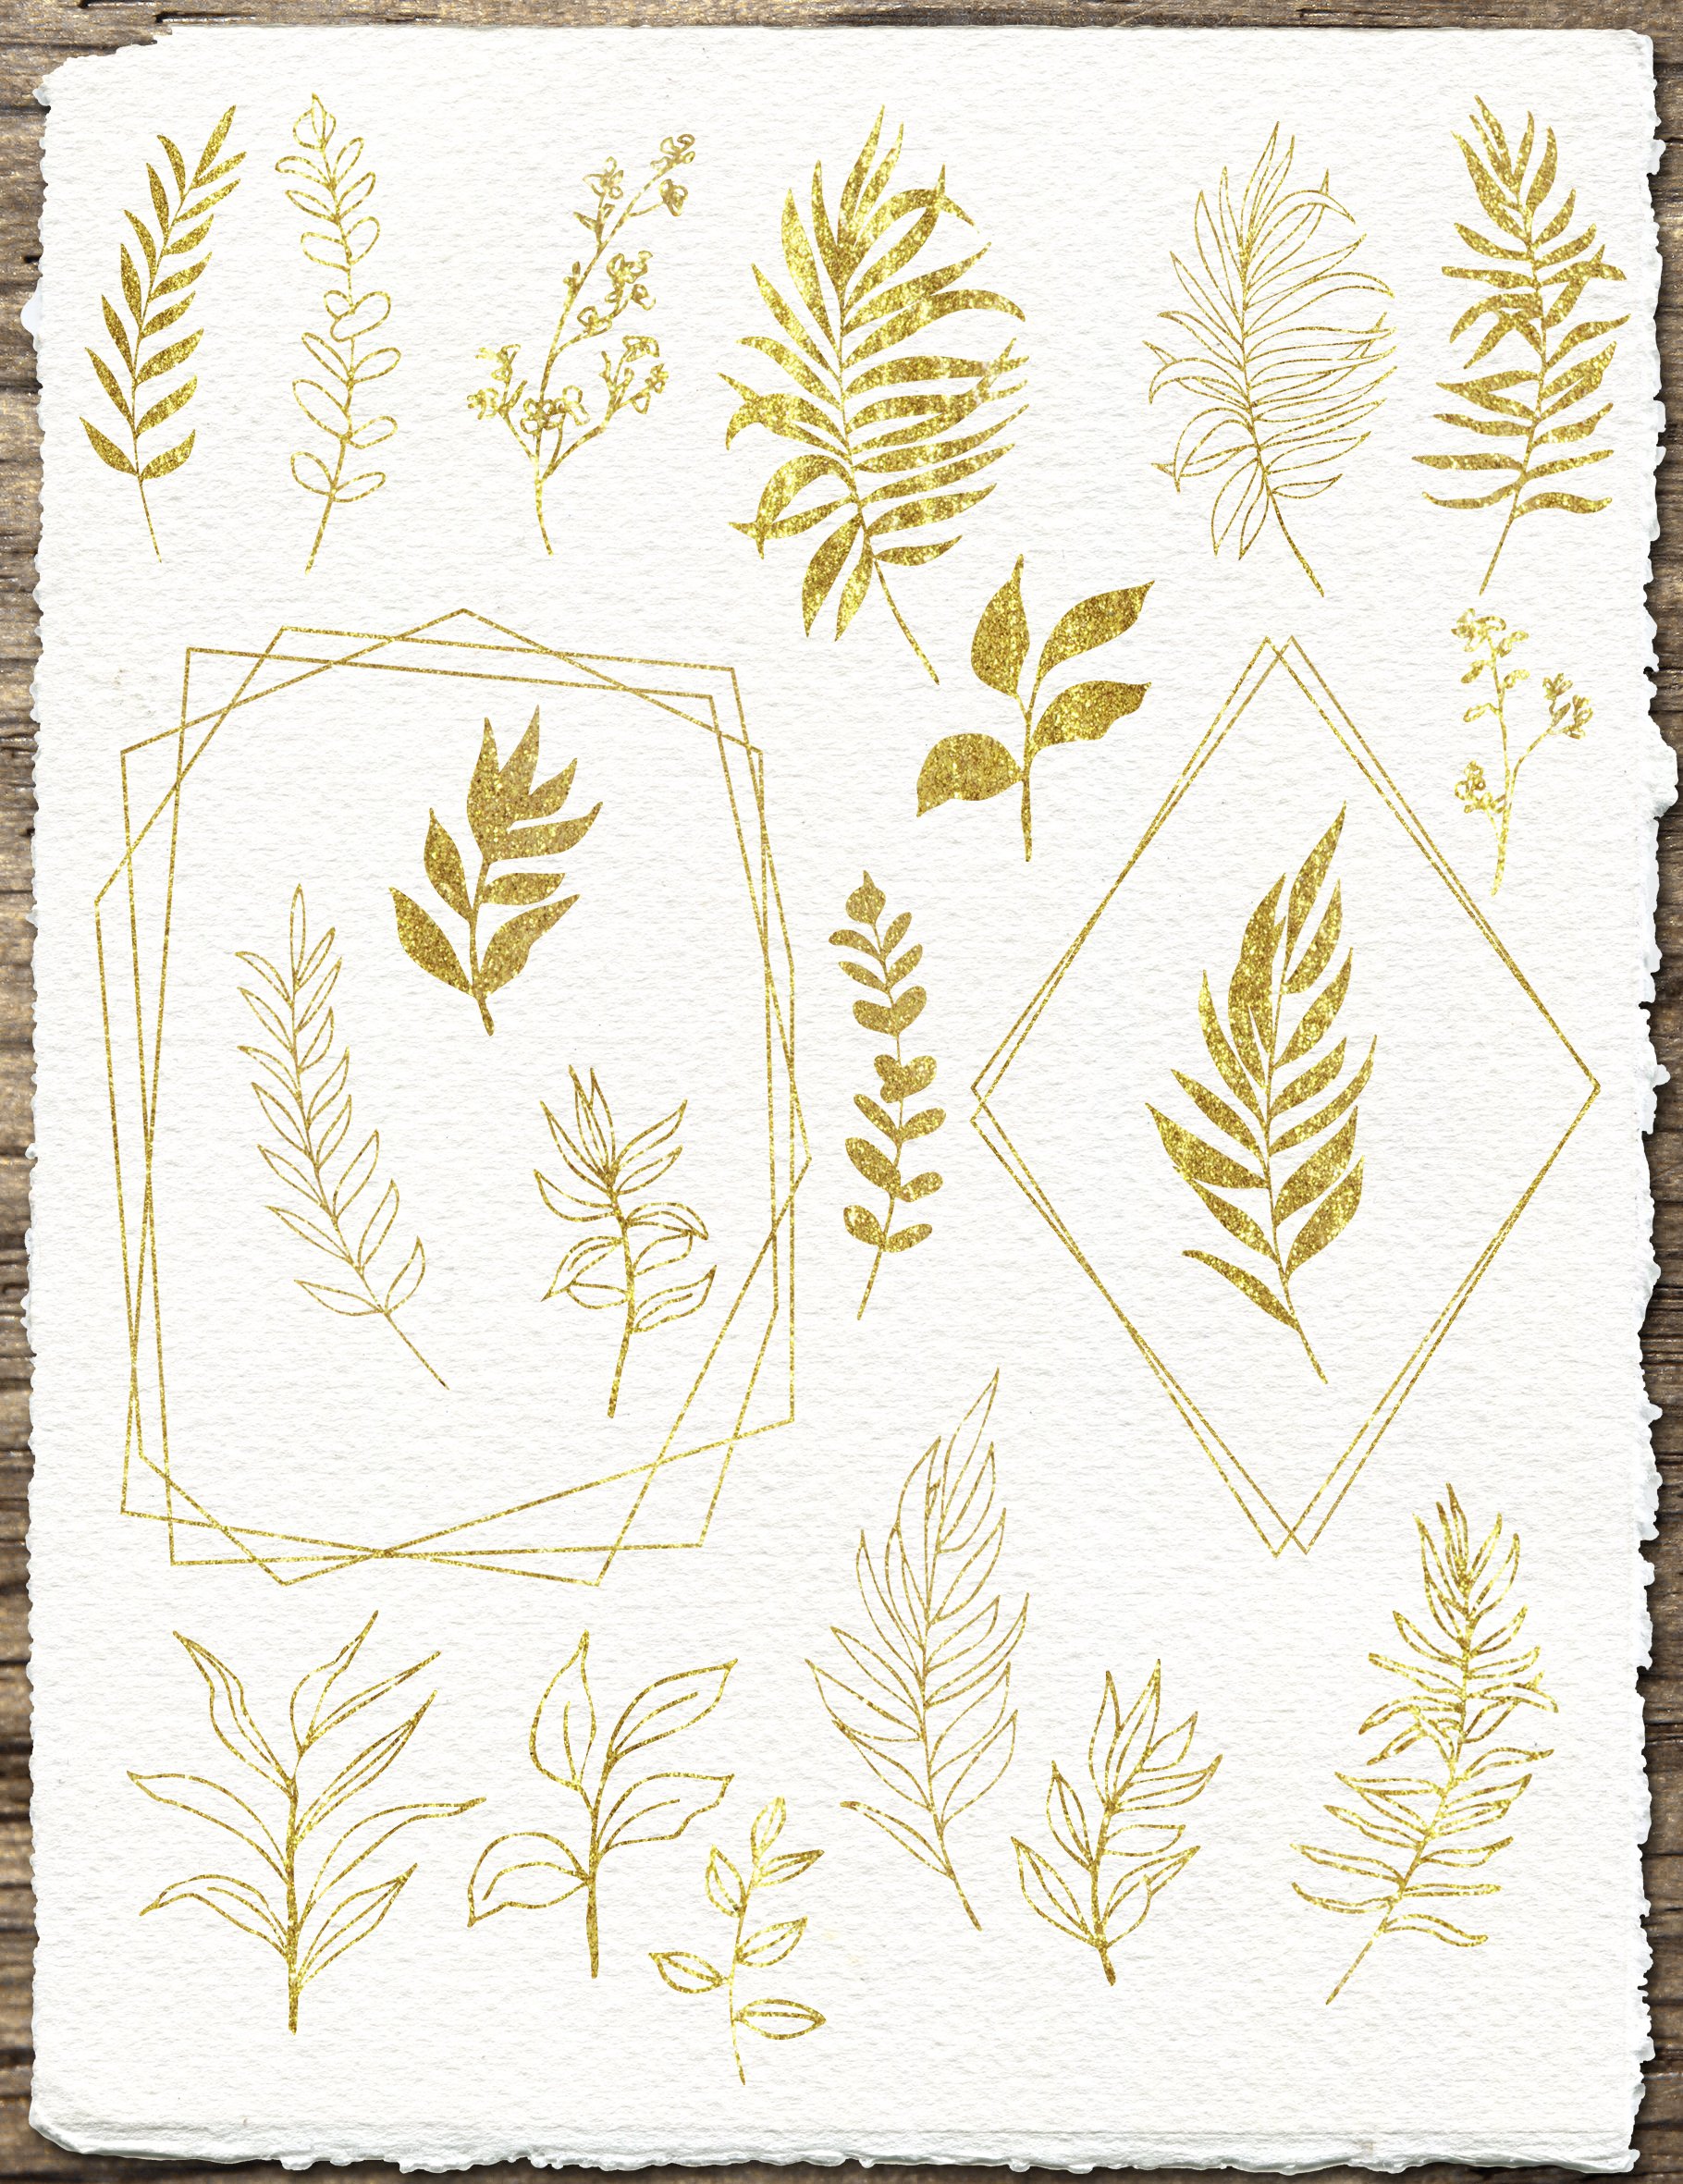 Piece of paper with gold leaf designs on it.